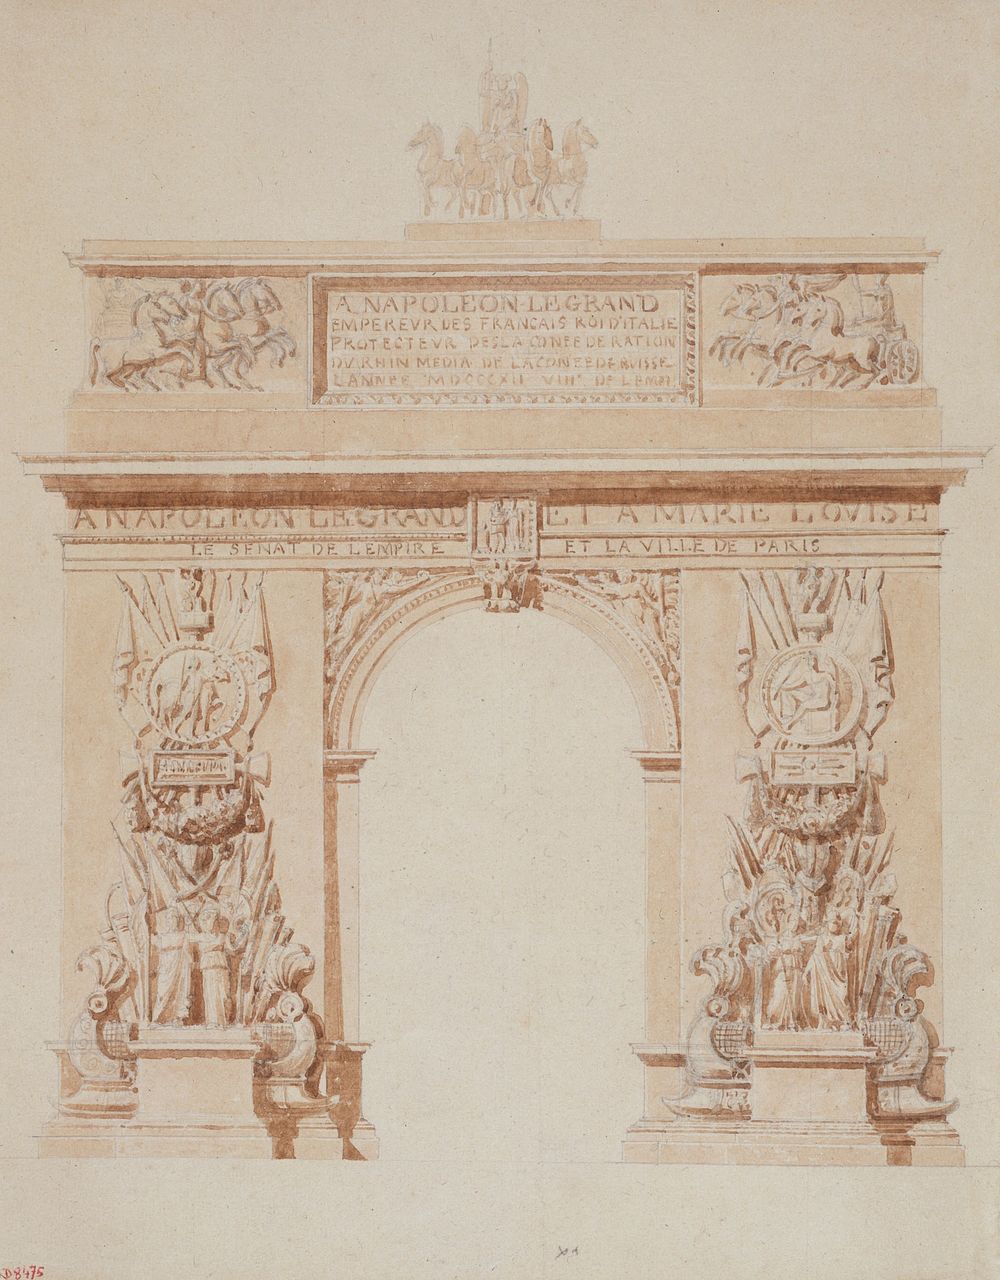 Decoration of the Arc de Triomphe project, on the occasion of the solemn entry of Napoleon and Marie-Louise (1812). Original…